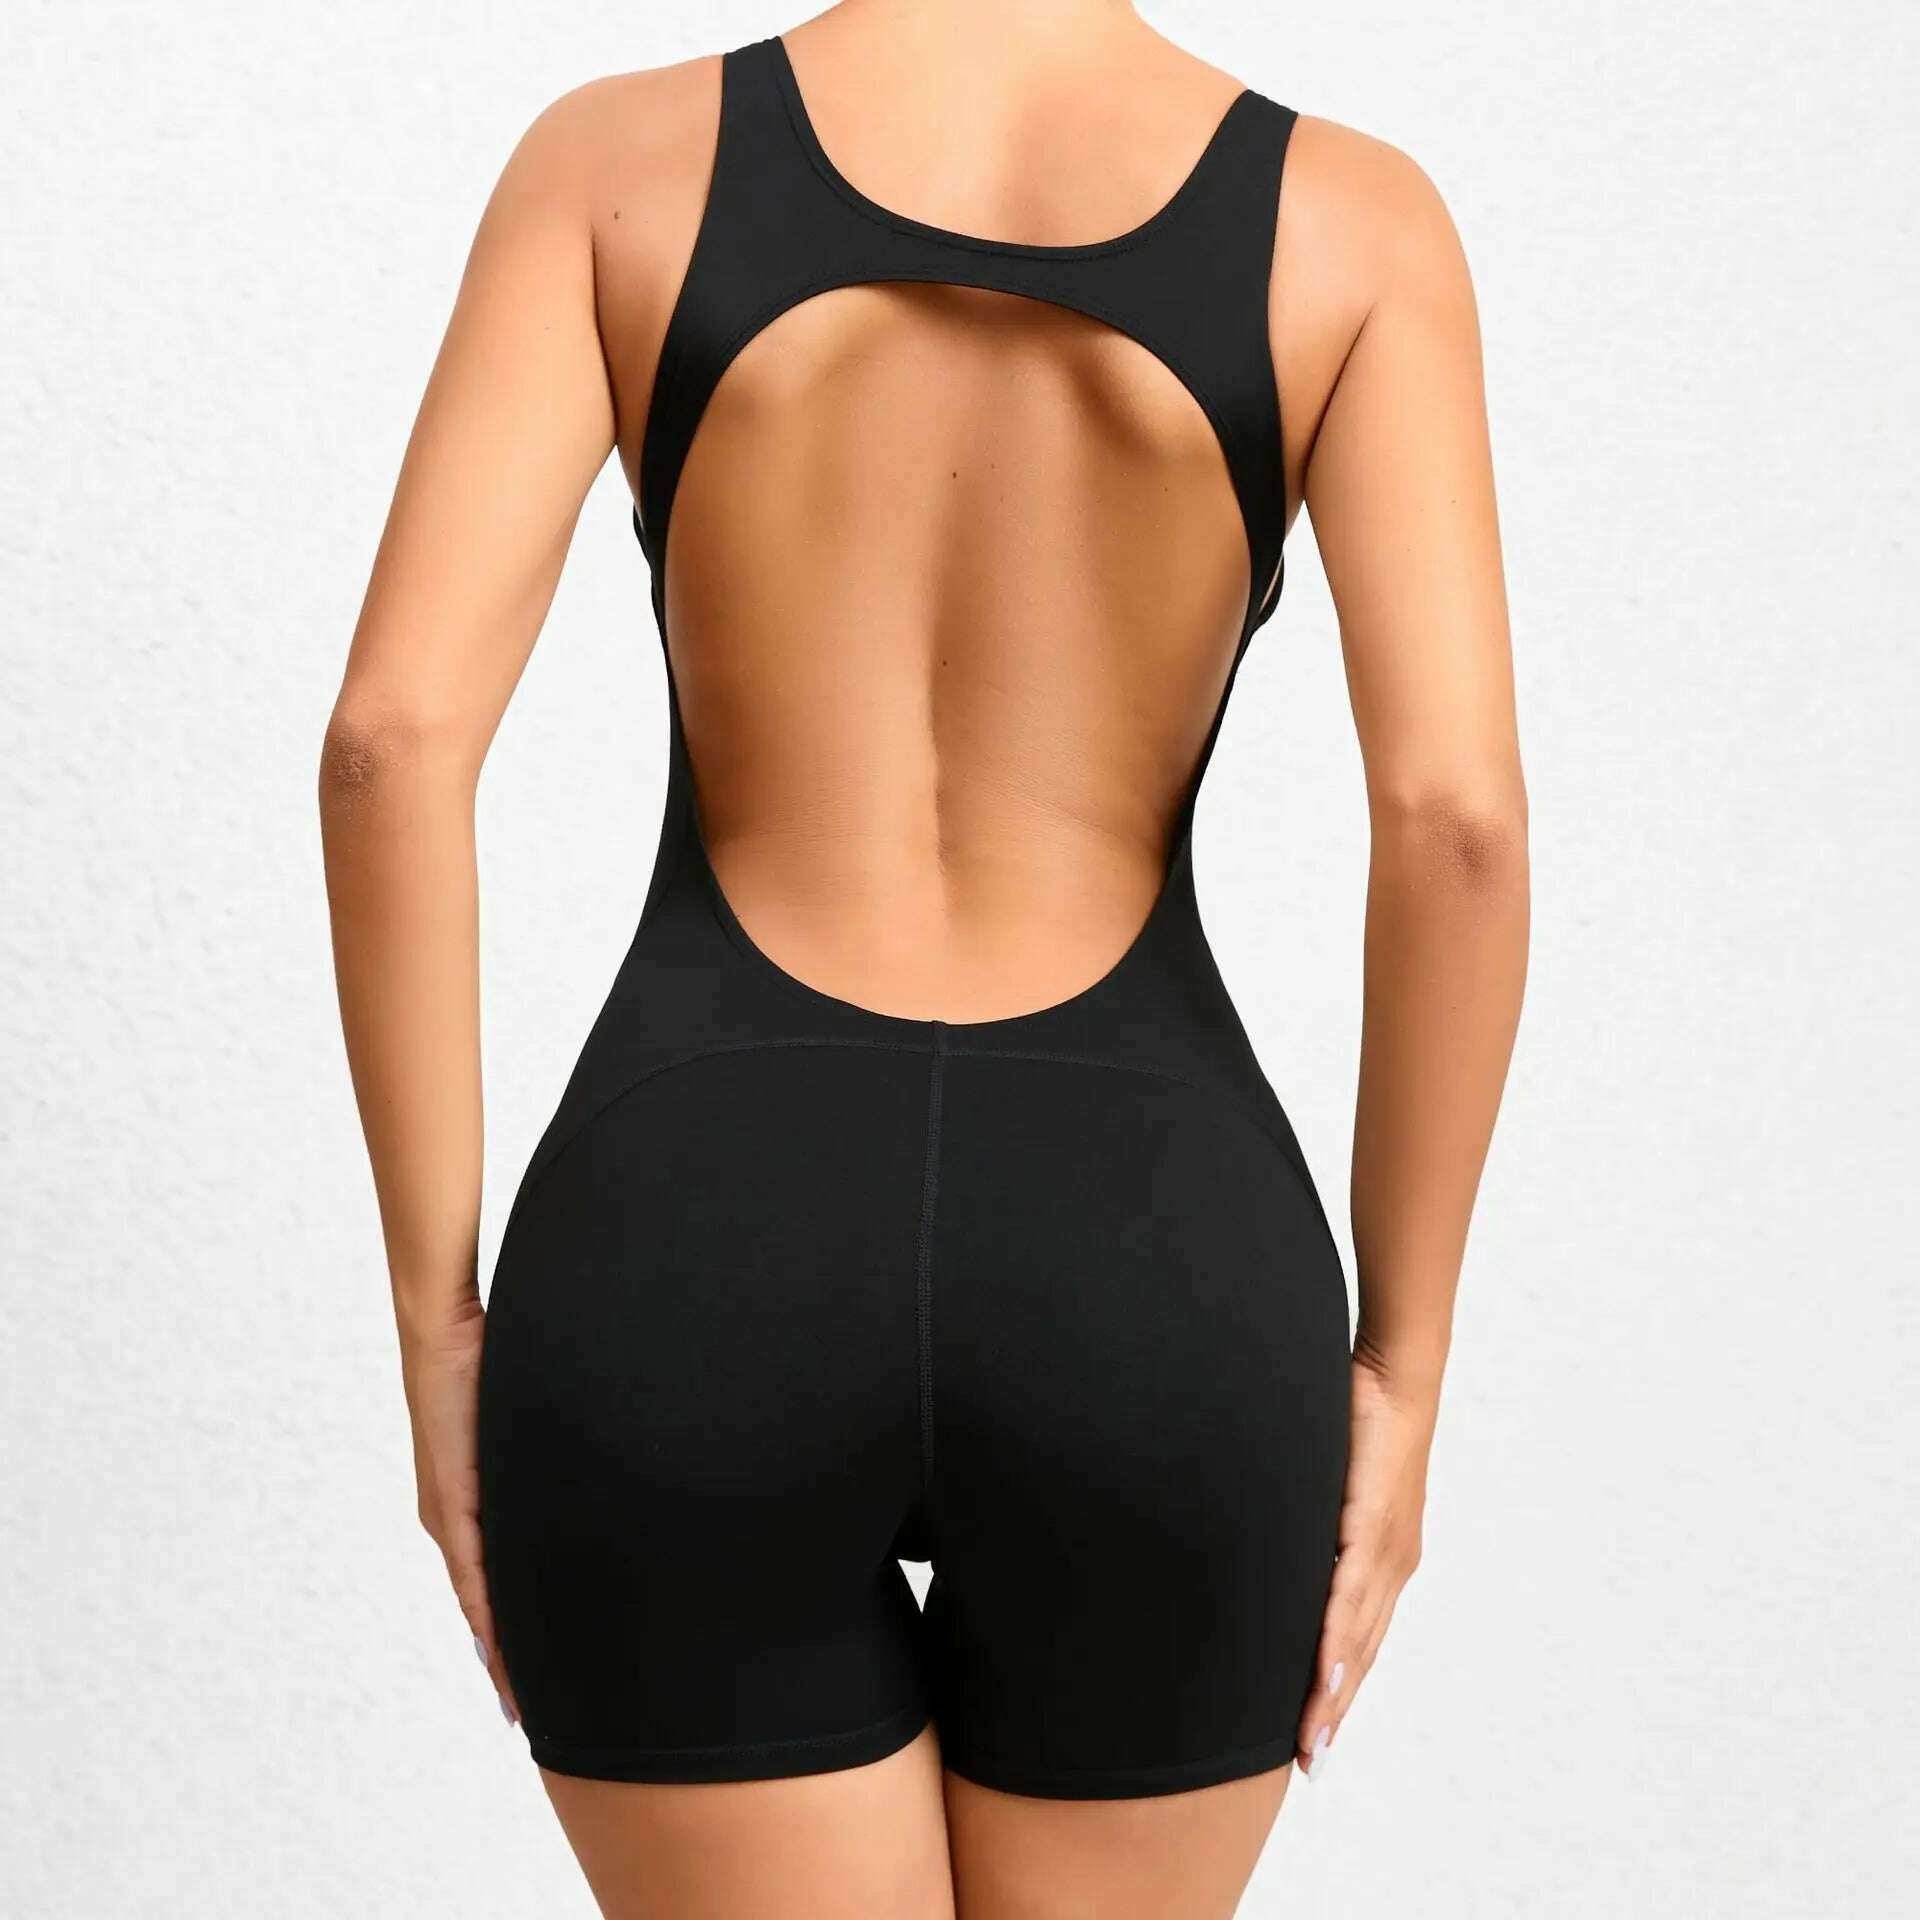 KIMLUD, Sporty Jumpsuit Women Gym Yoga Clothing Lycra Short Fitness Overalls Backless Workout Clothes for Women Sport Set Activewear New, black / M, KIMLUD Womens Clothes